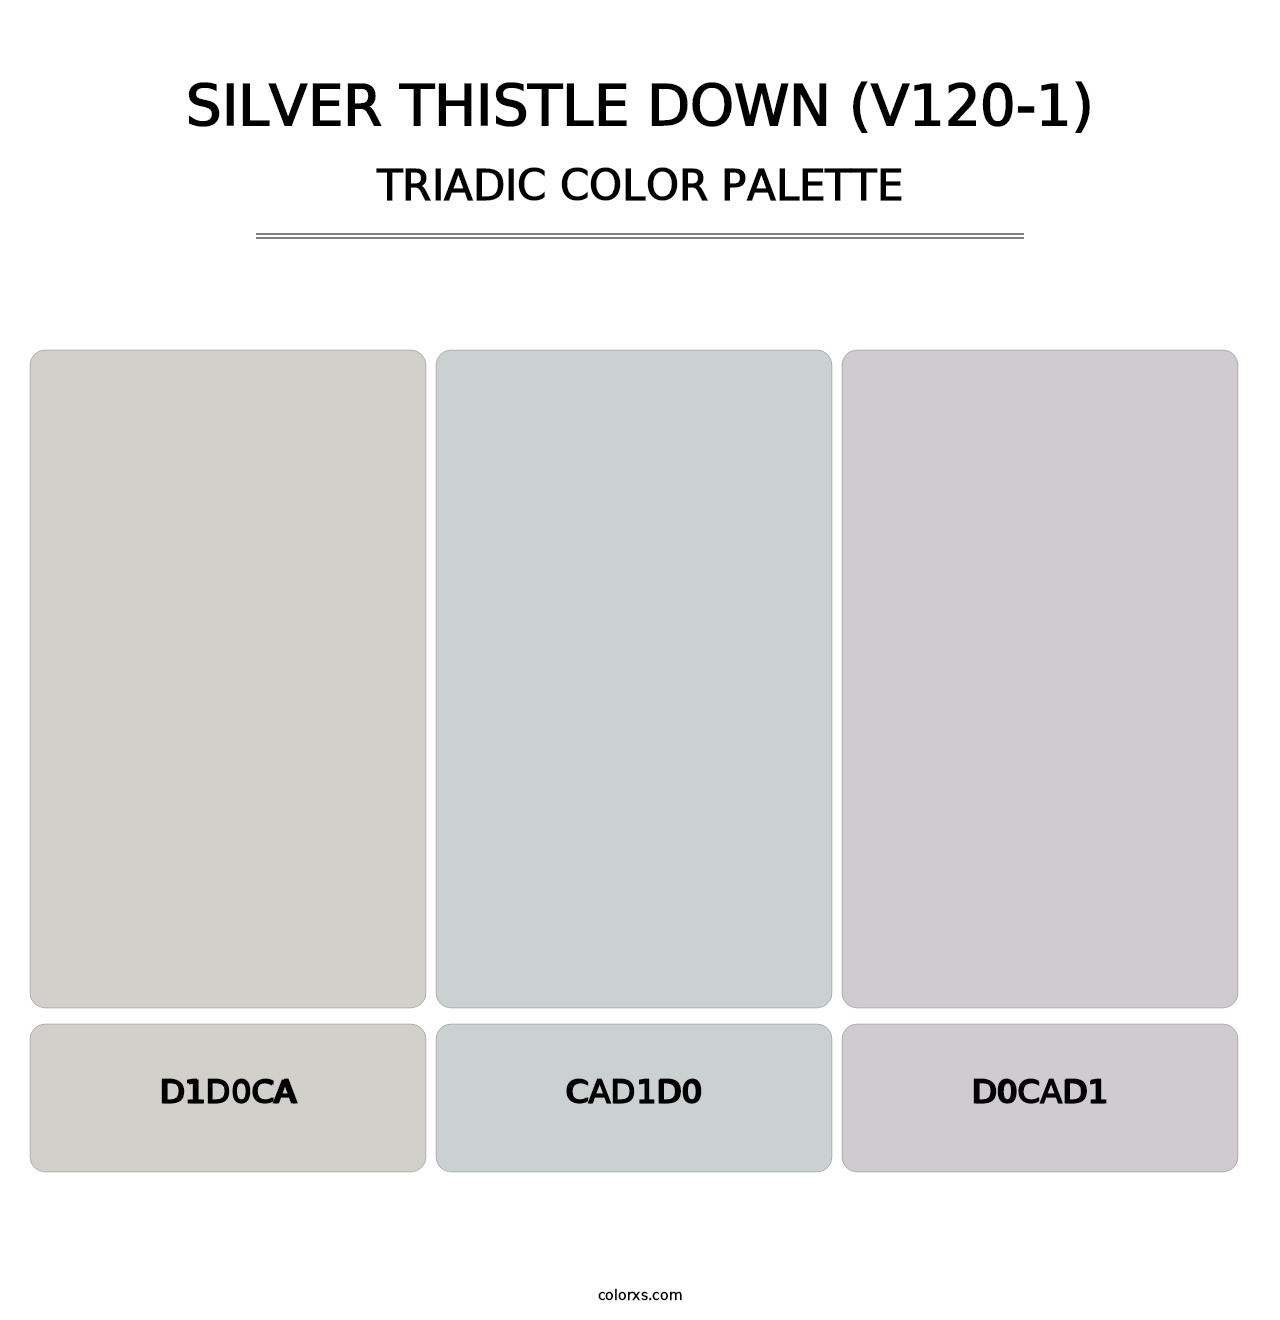 Silver Thistle Down (V120-1) - Triadic Color Palette